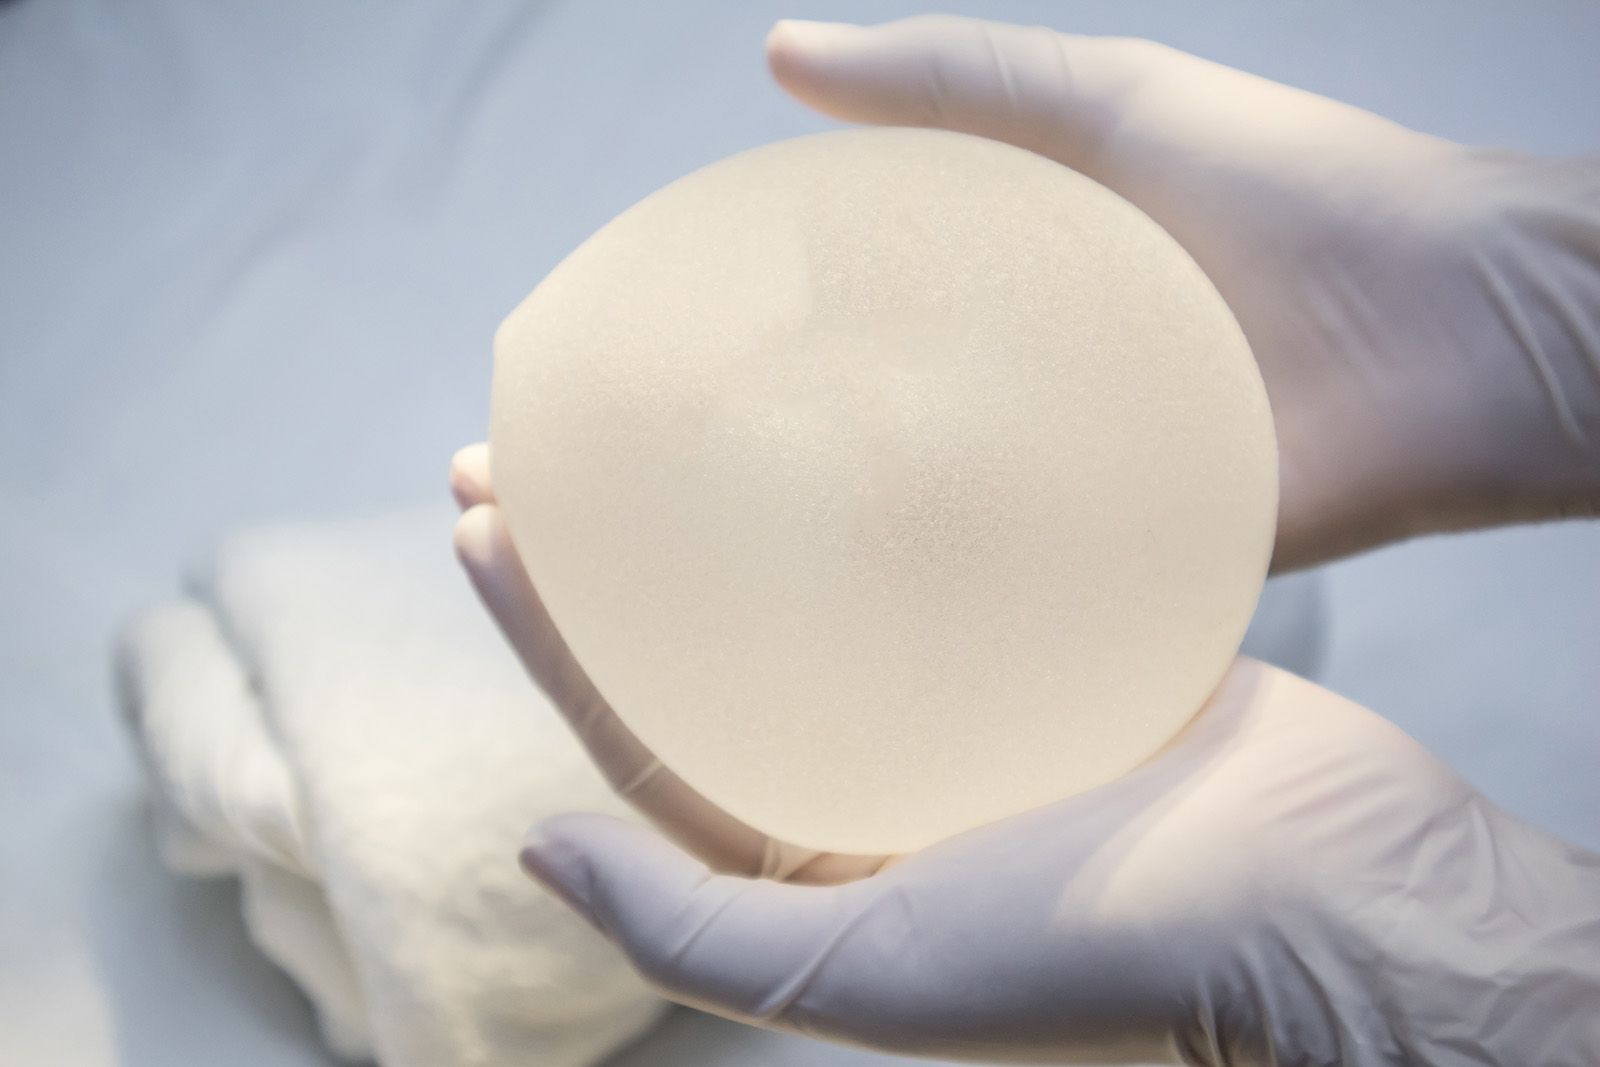 Post-Op Symptoms after Breast Augmentation Mammoplasty: What's Normal?